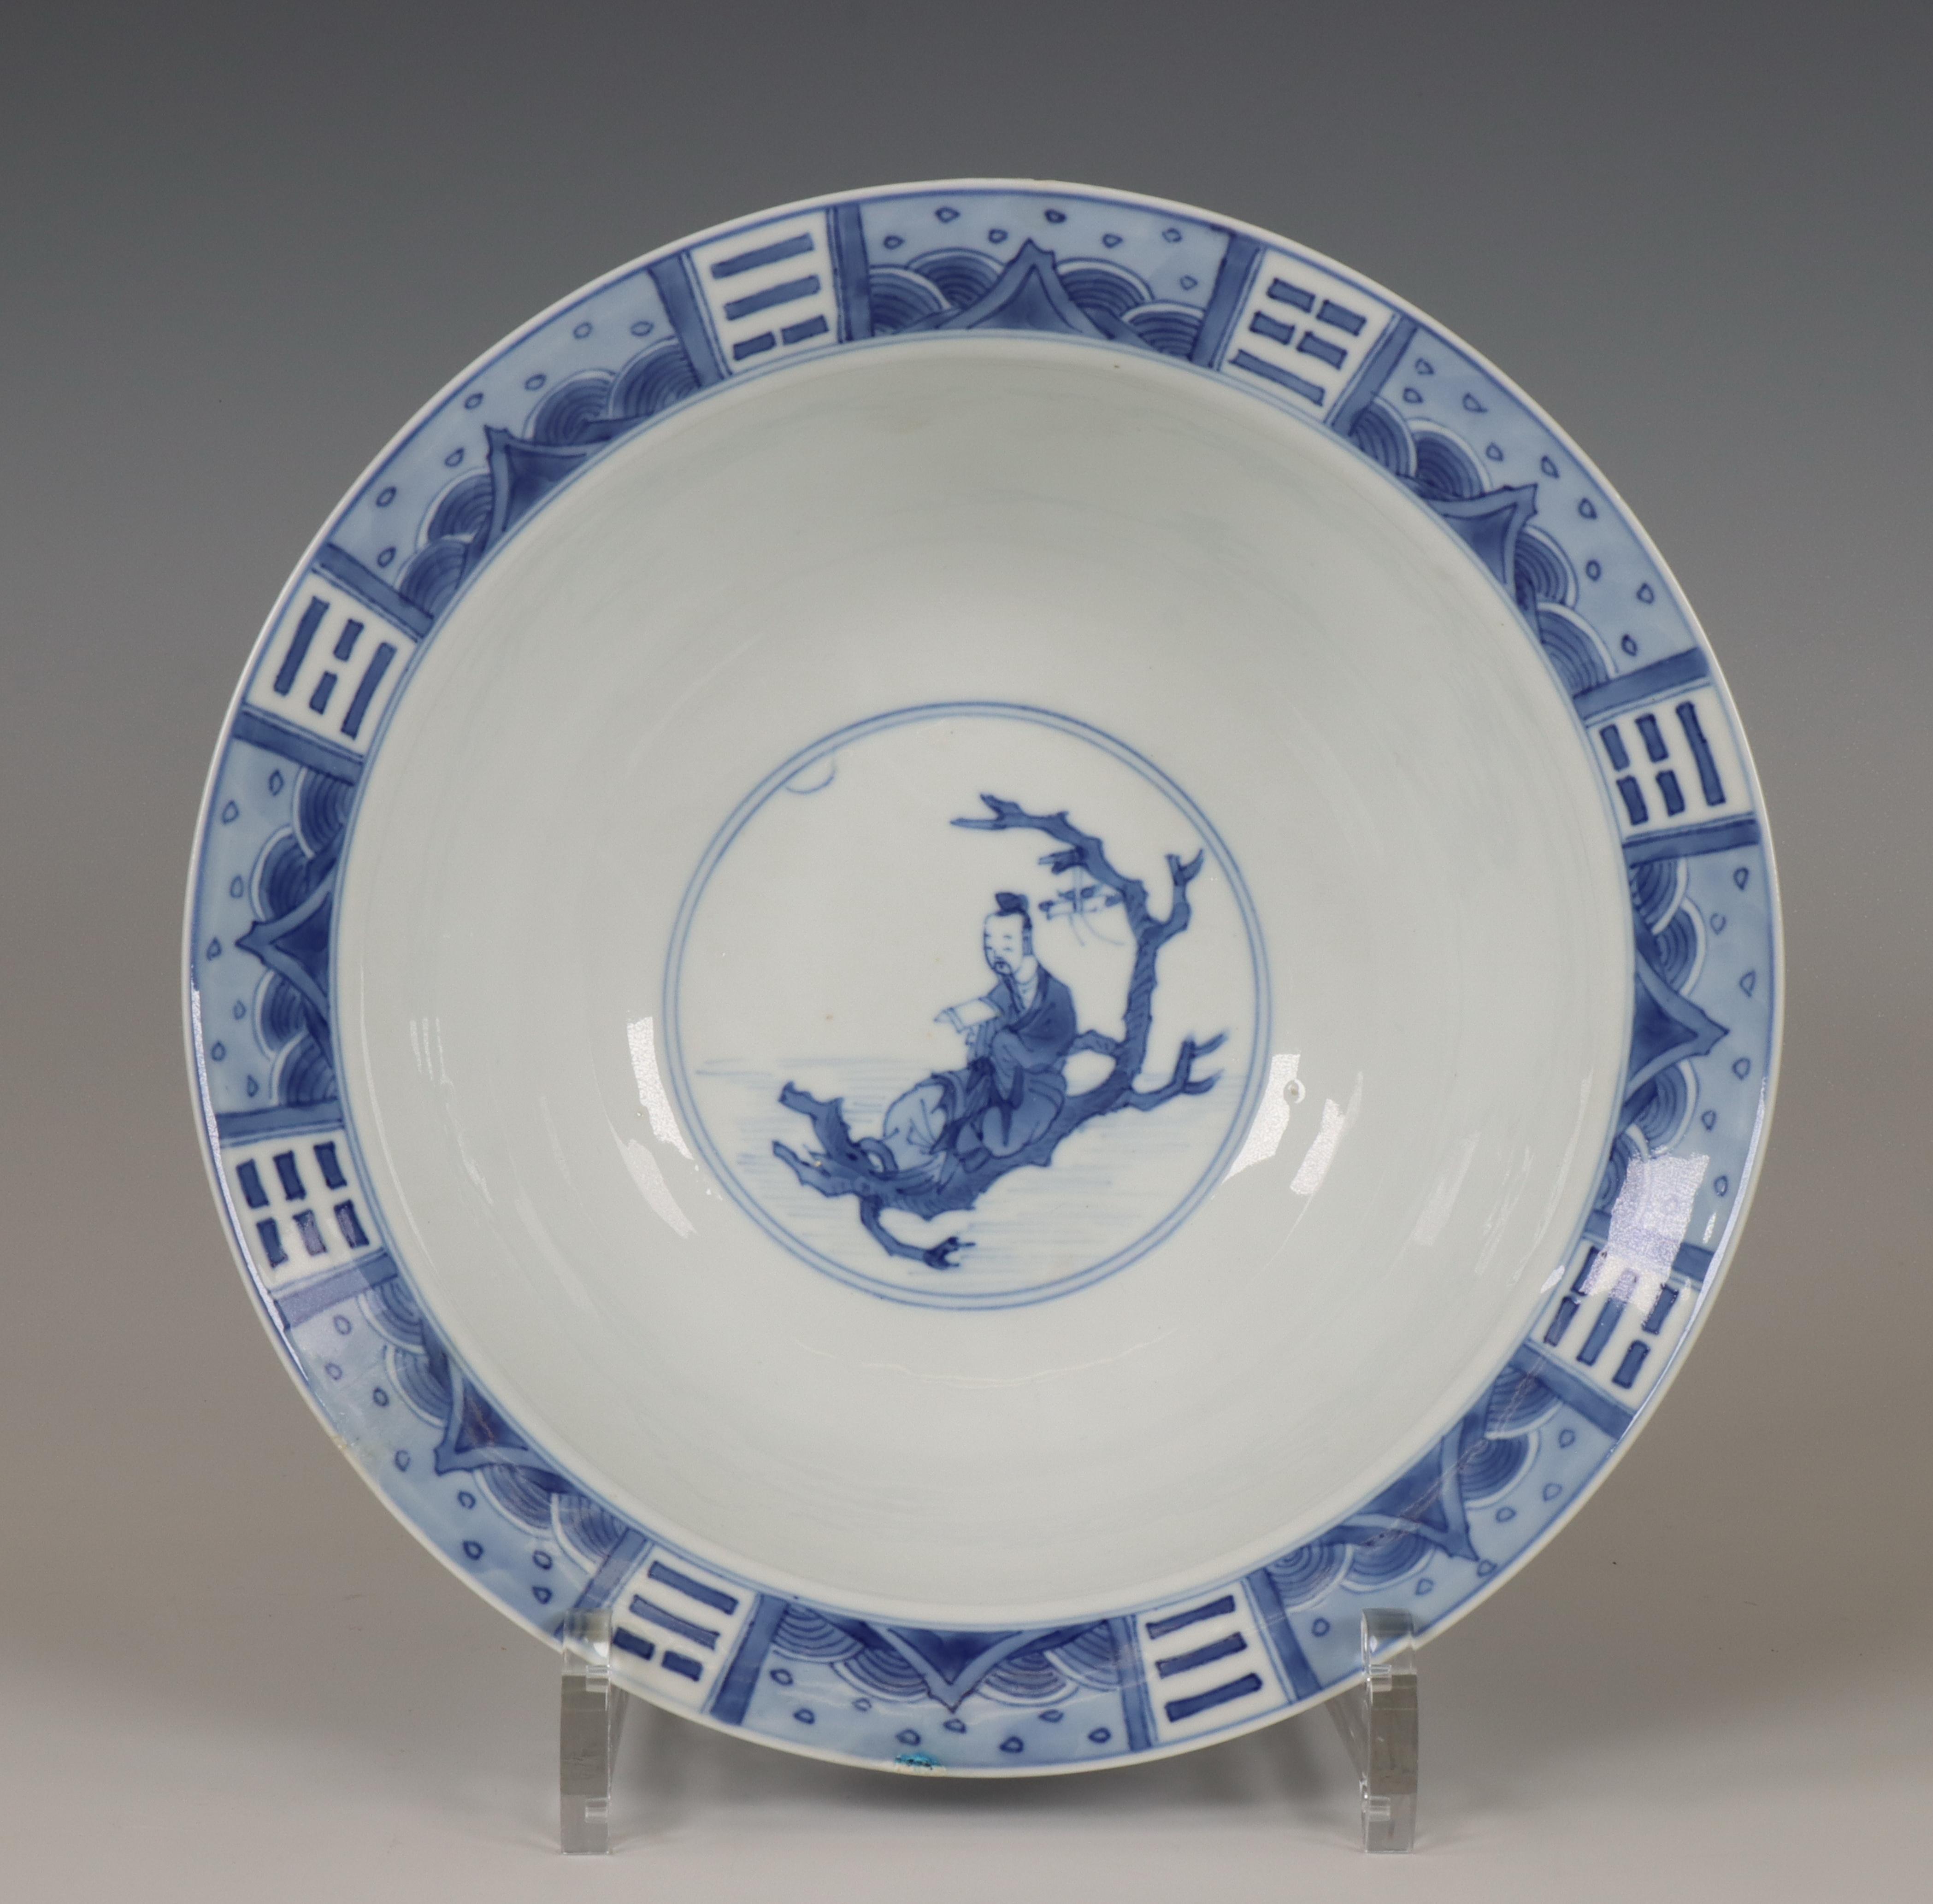 China, a blue and white porcelain bowl, Kangxi period (1662-1722), - Image 5 of 8